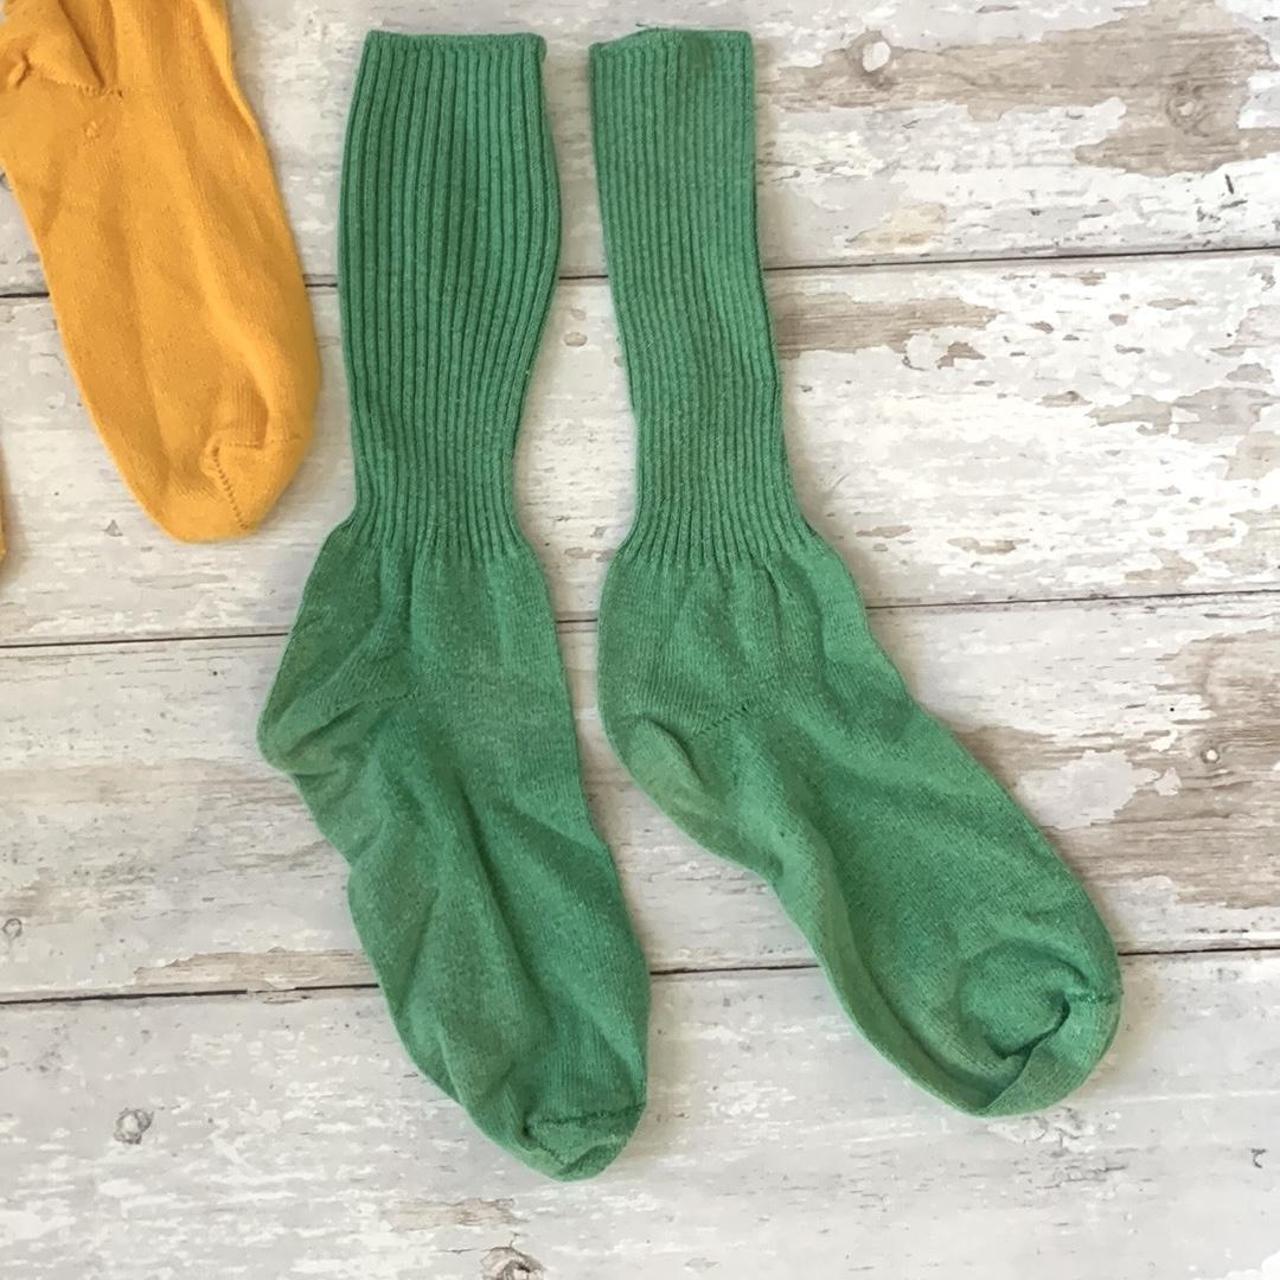 PacSun Men's Green and Blue Socks (2)